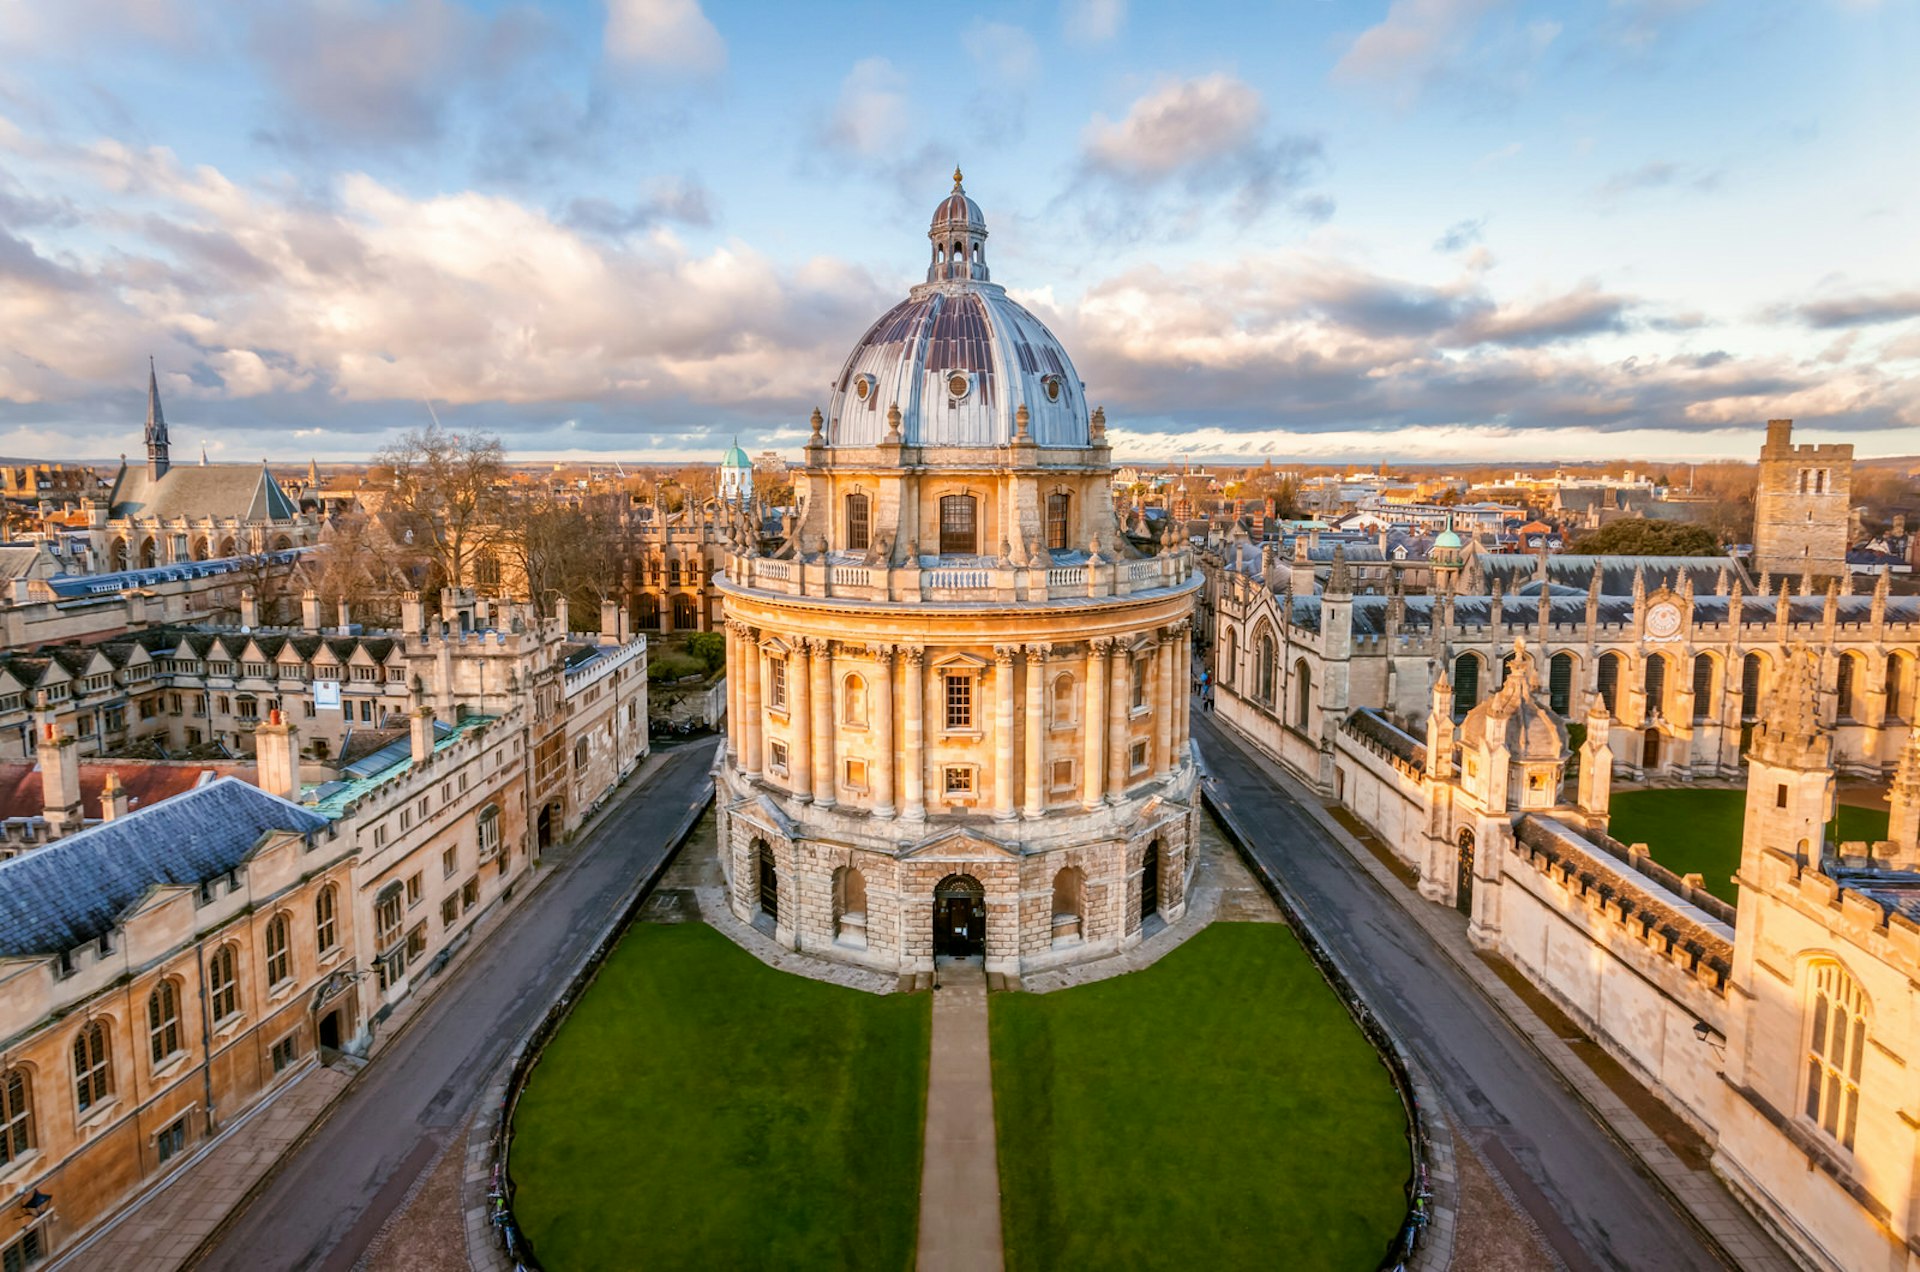 Cities for architecture lovers - Oxford's Radcliffe Camera